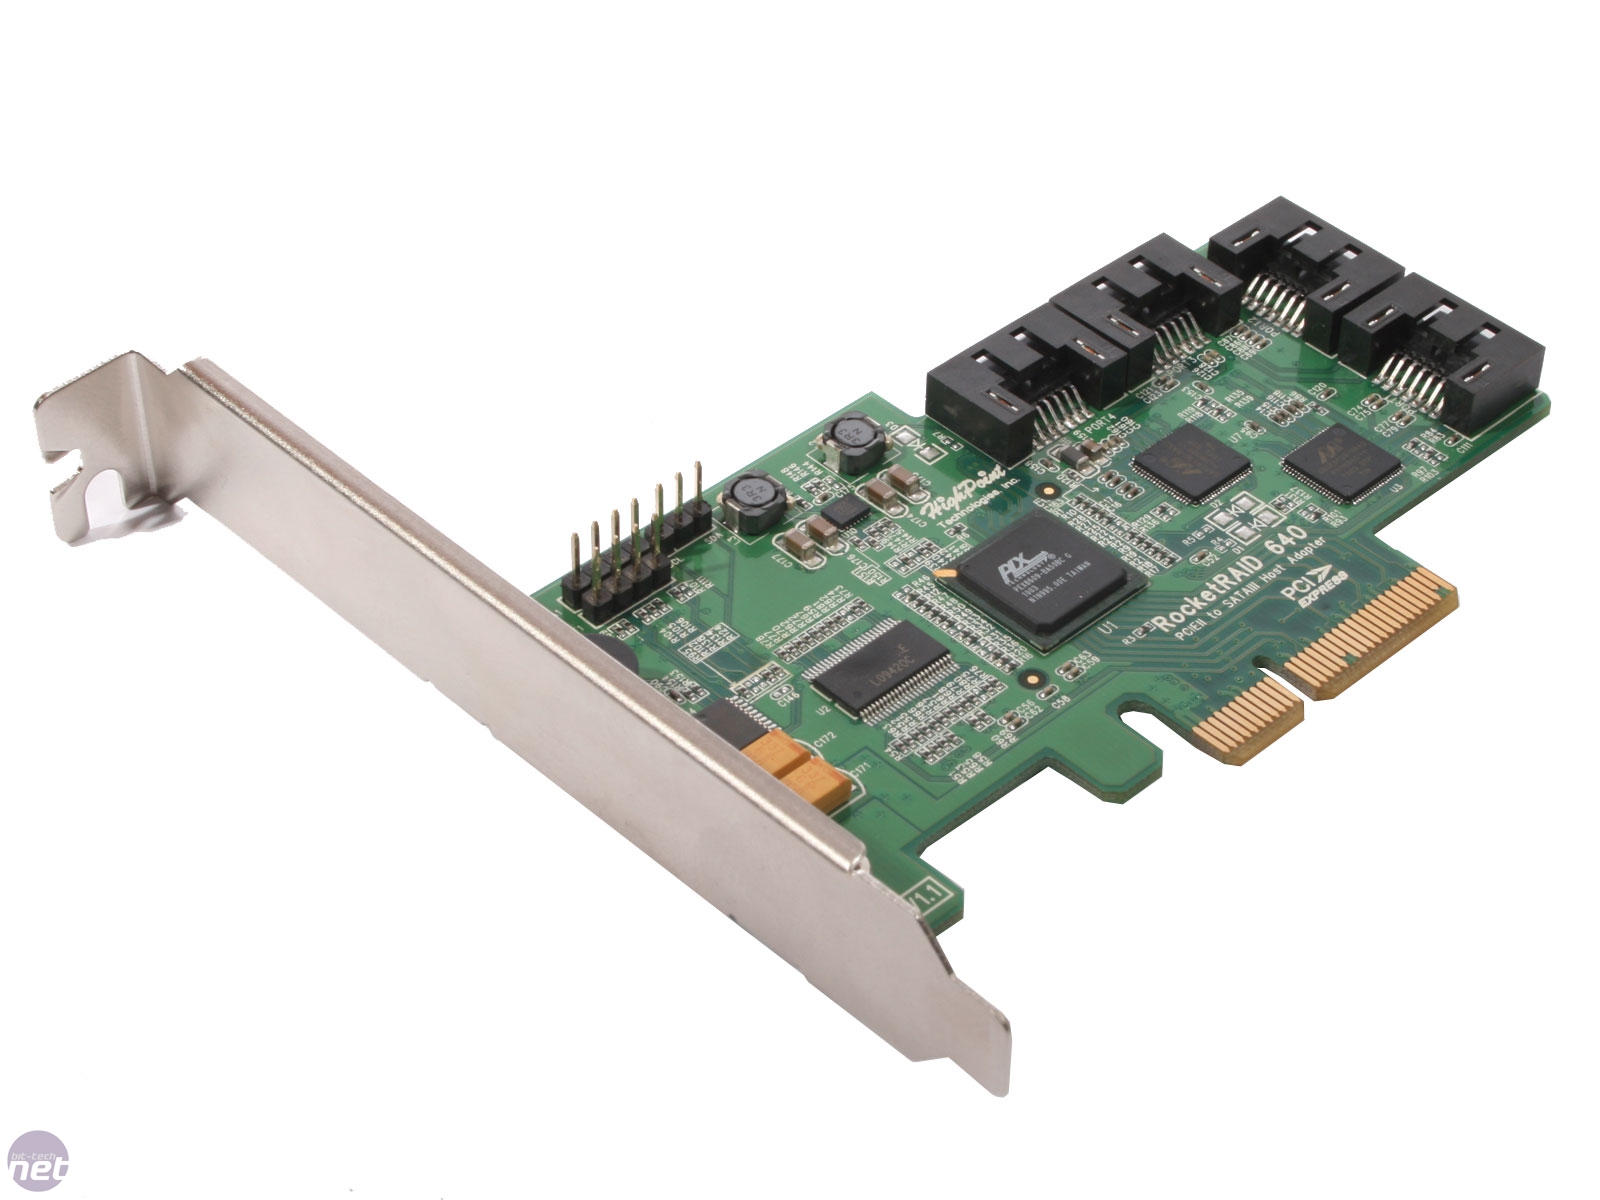 HighPoint ハイポイント RocketRAID 2720A レイドコントローラー 8-Channel 6Gb/s PCIe 2.0 x8 